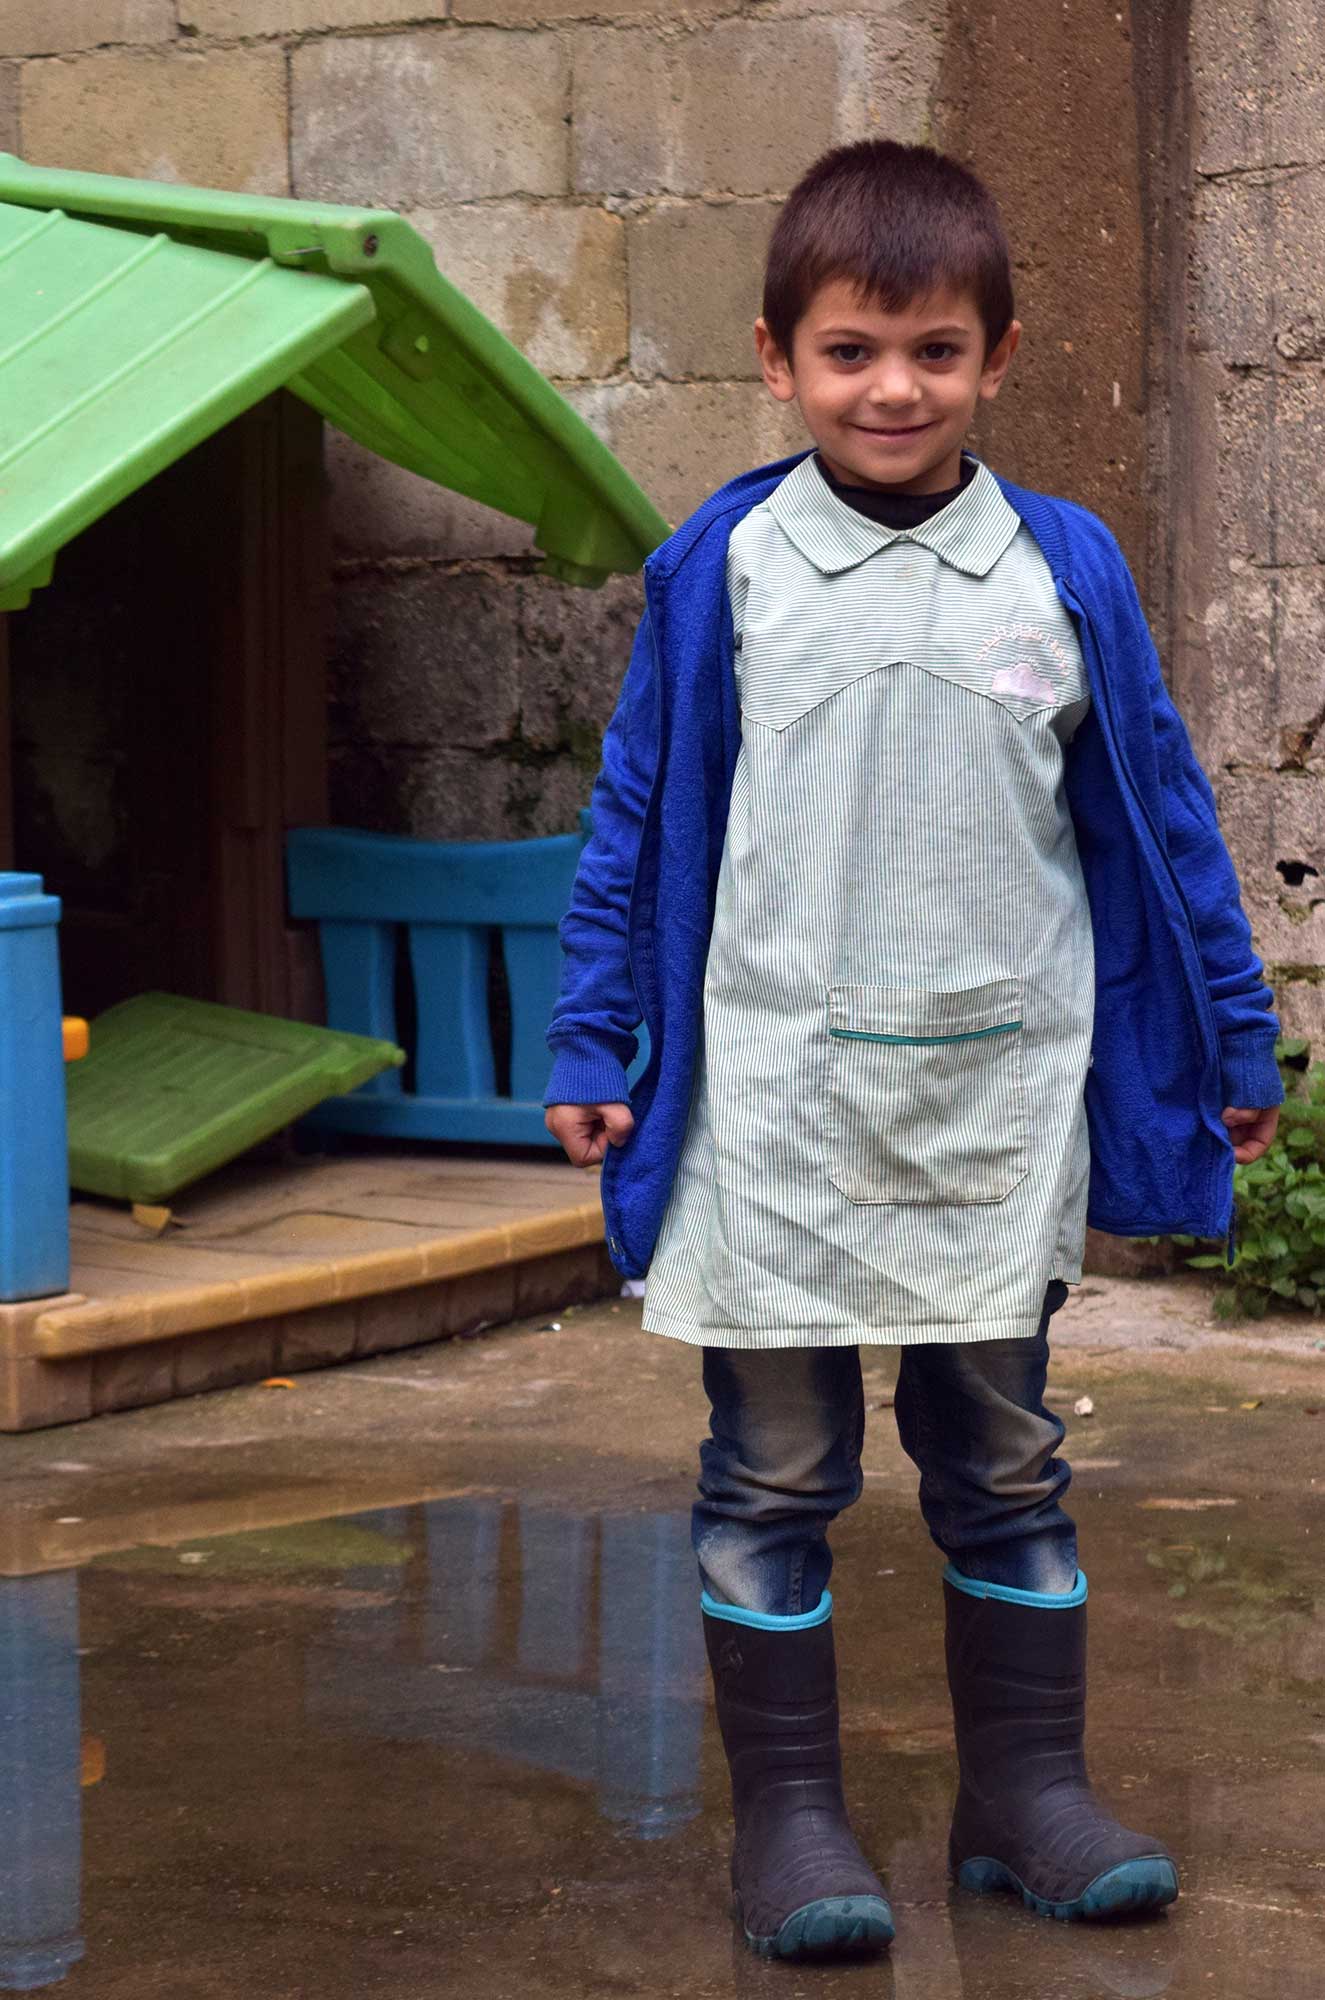 Taha outside the Children and Youth Center in Nahr El Bared, wearing his new boots.